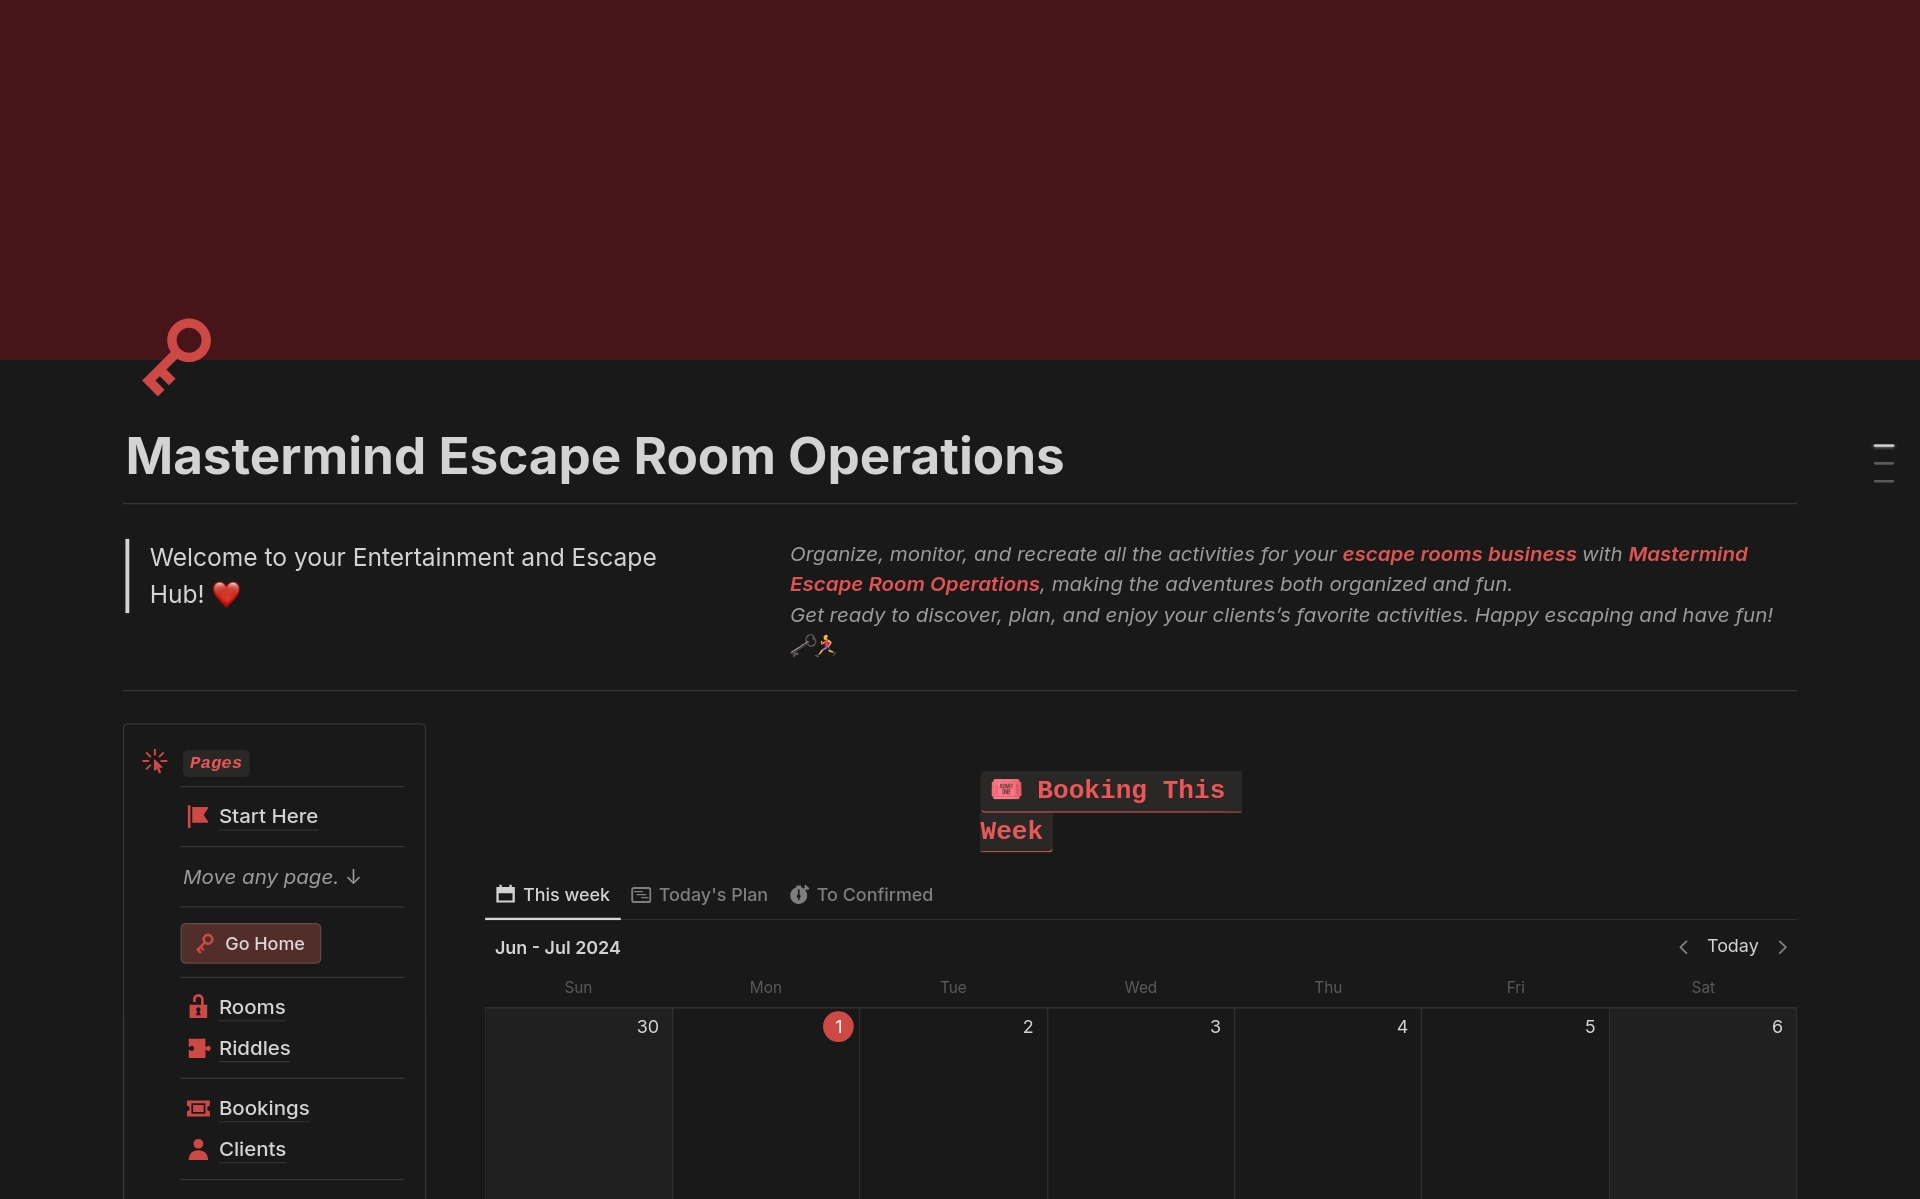 Manage your escape room business with ease using Mastermind Escape Room Operations! This Notion template covers all aspects, from room details, riddles, reservations and financials. Streamline your operations and enhance your customer experience today! 🧩📅📊